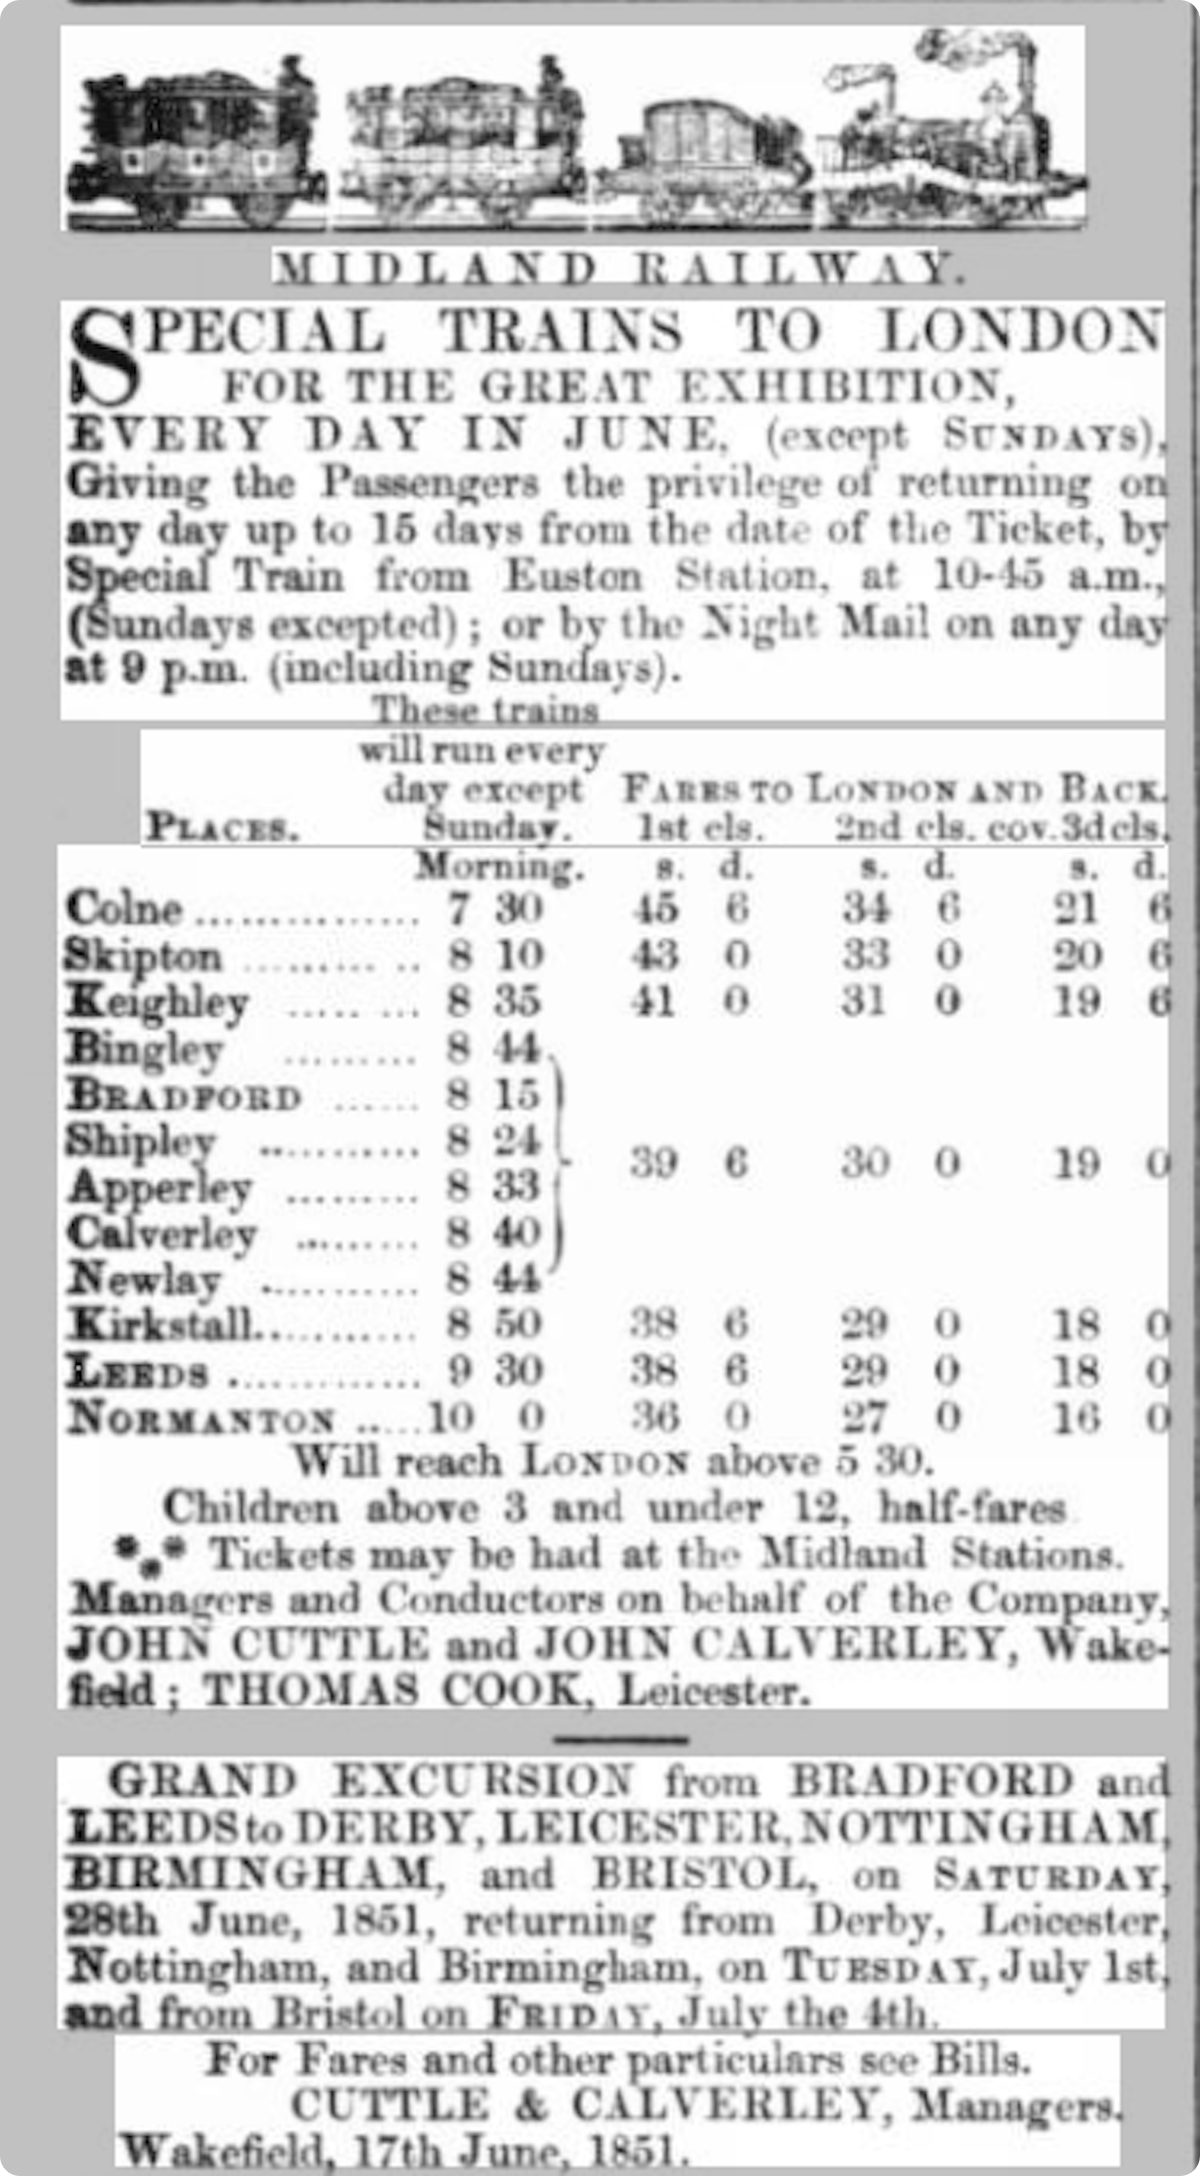 Newspaper advert for rail journeys to the seaside.